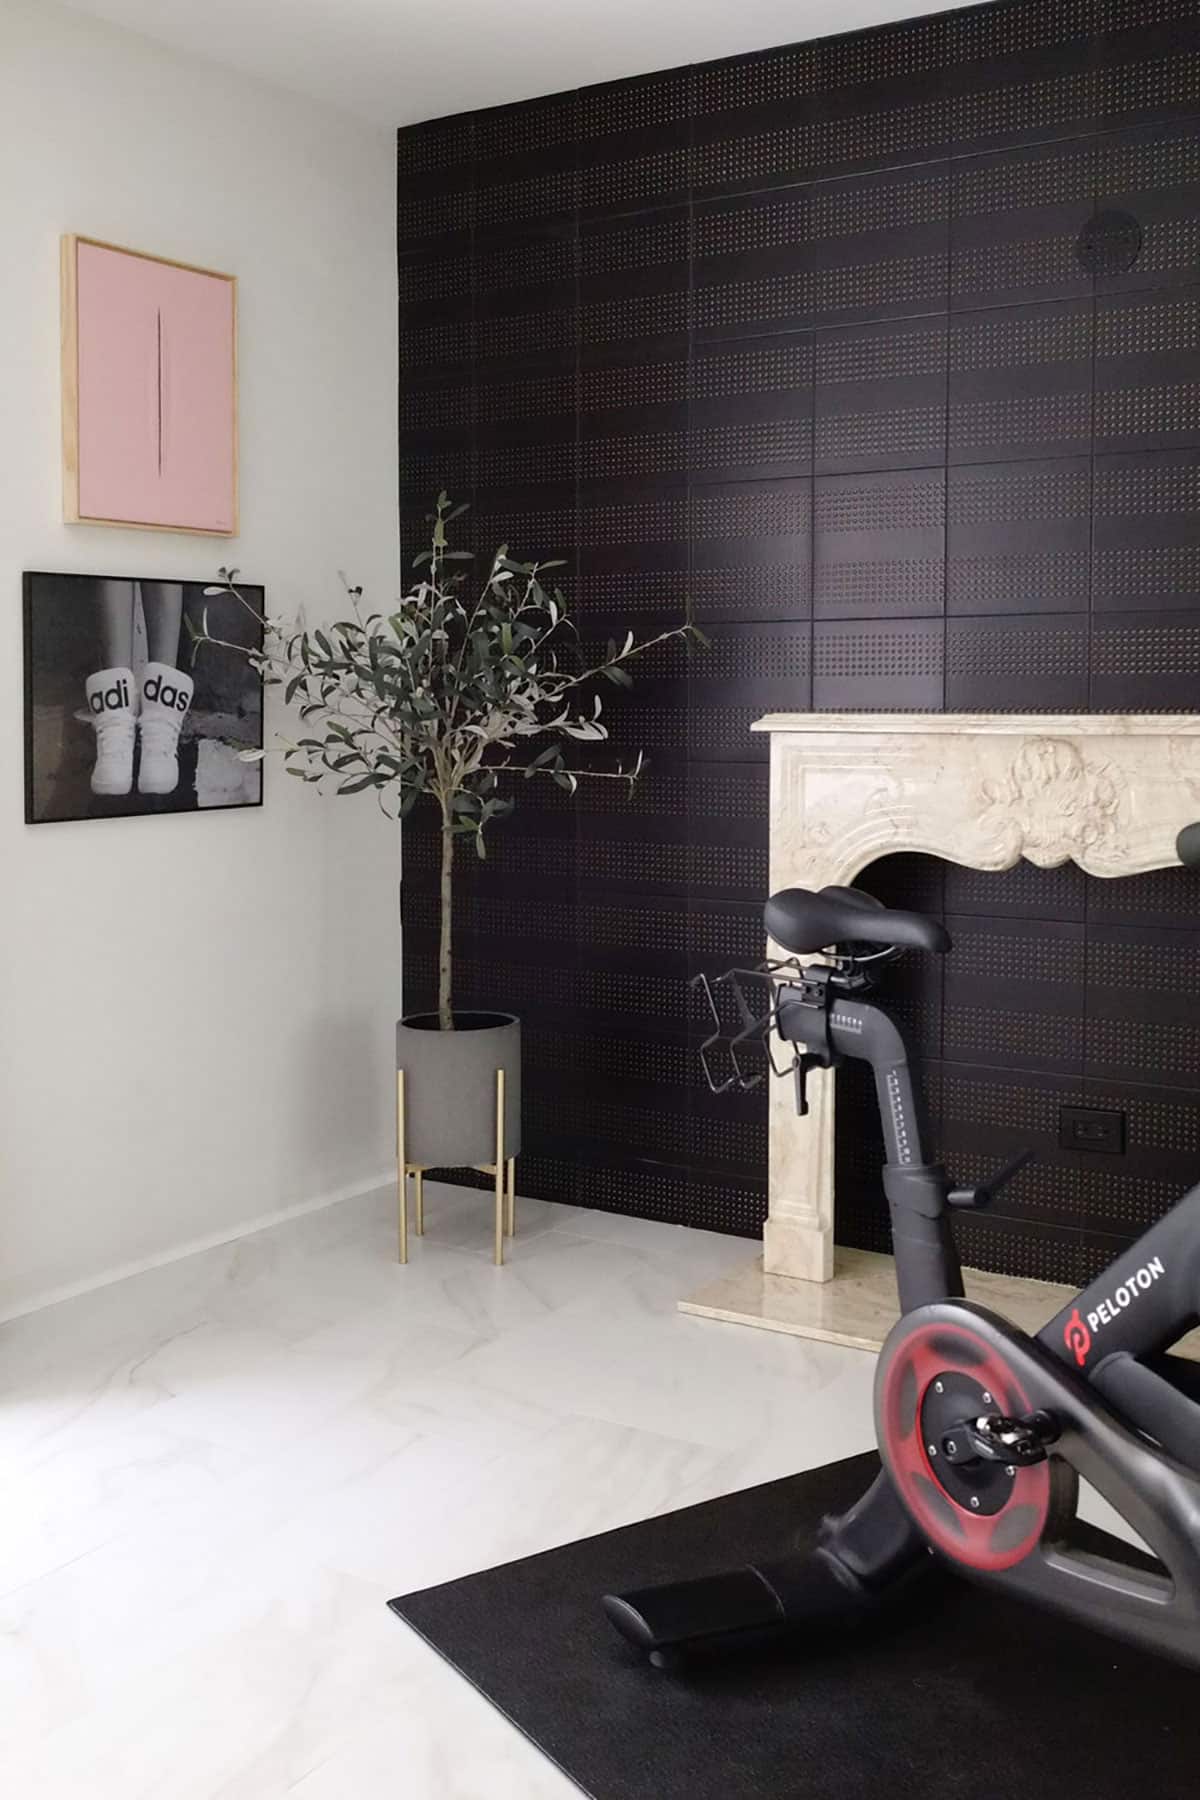 Creating an Eclectic Modern Home Gym and Office in One Space